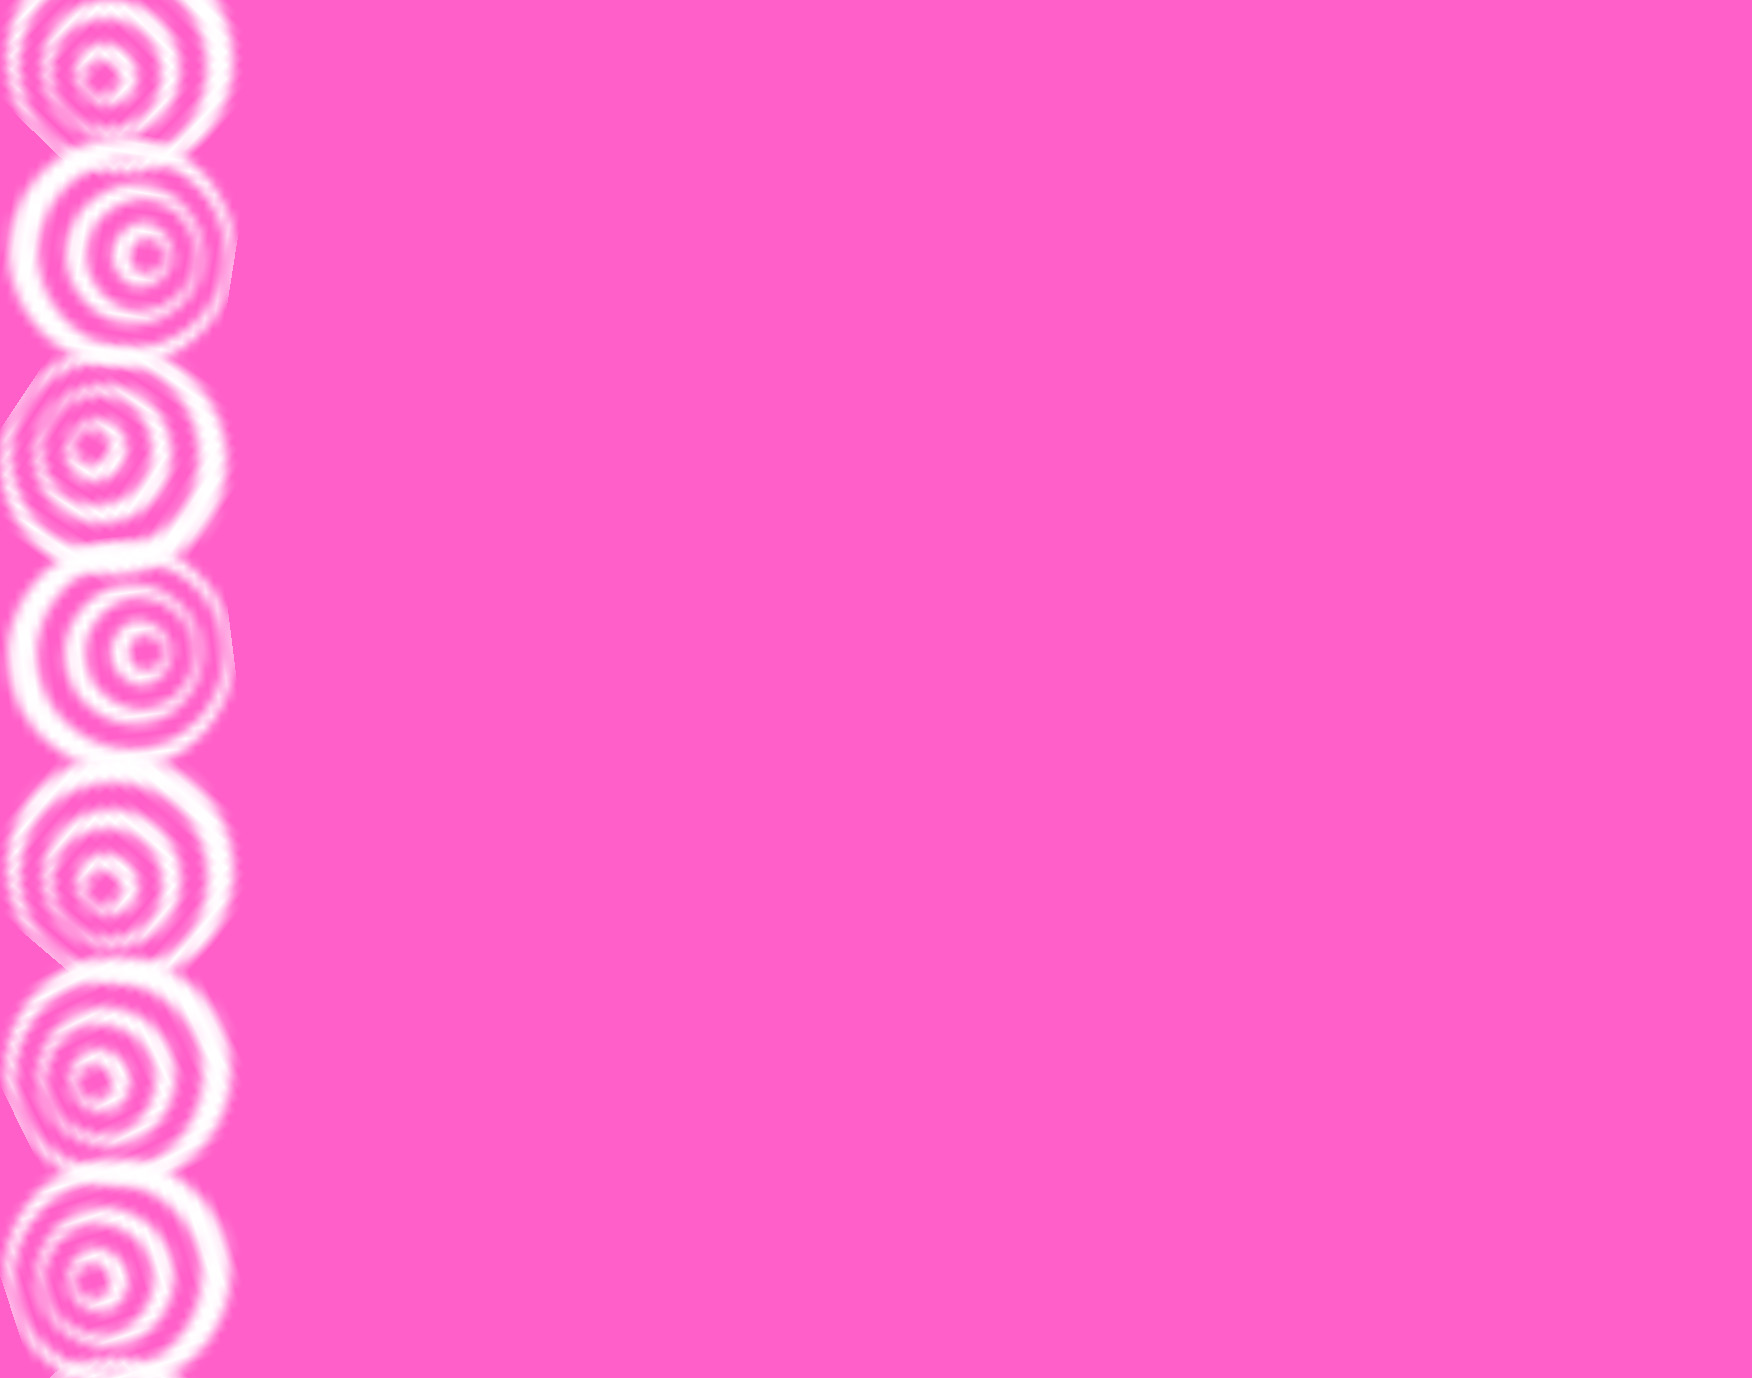 Swirl Pink Background Search Results Calendar